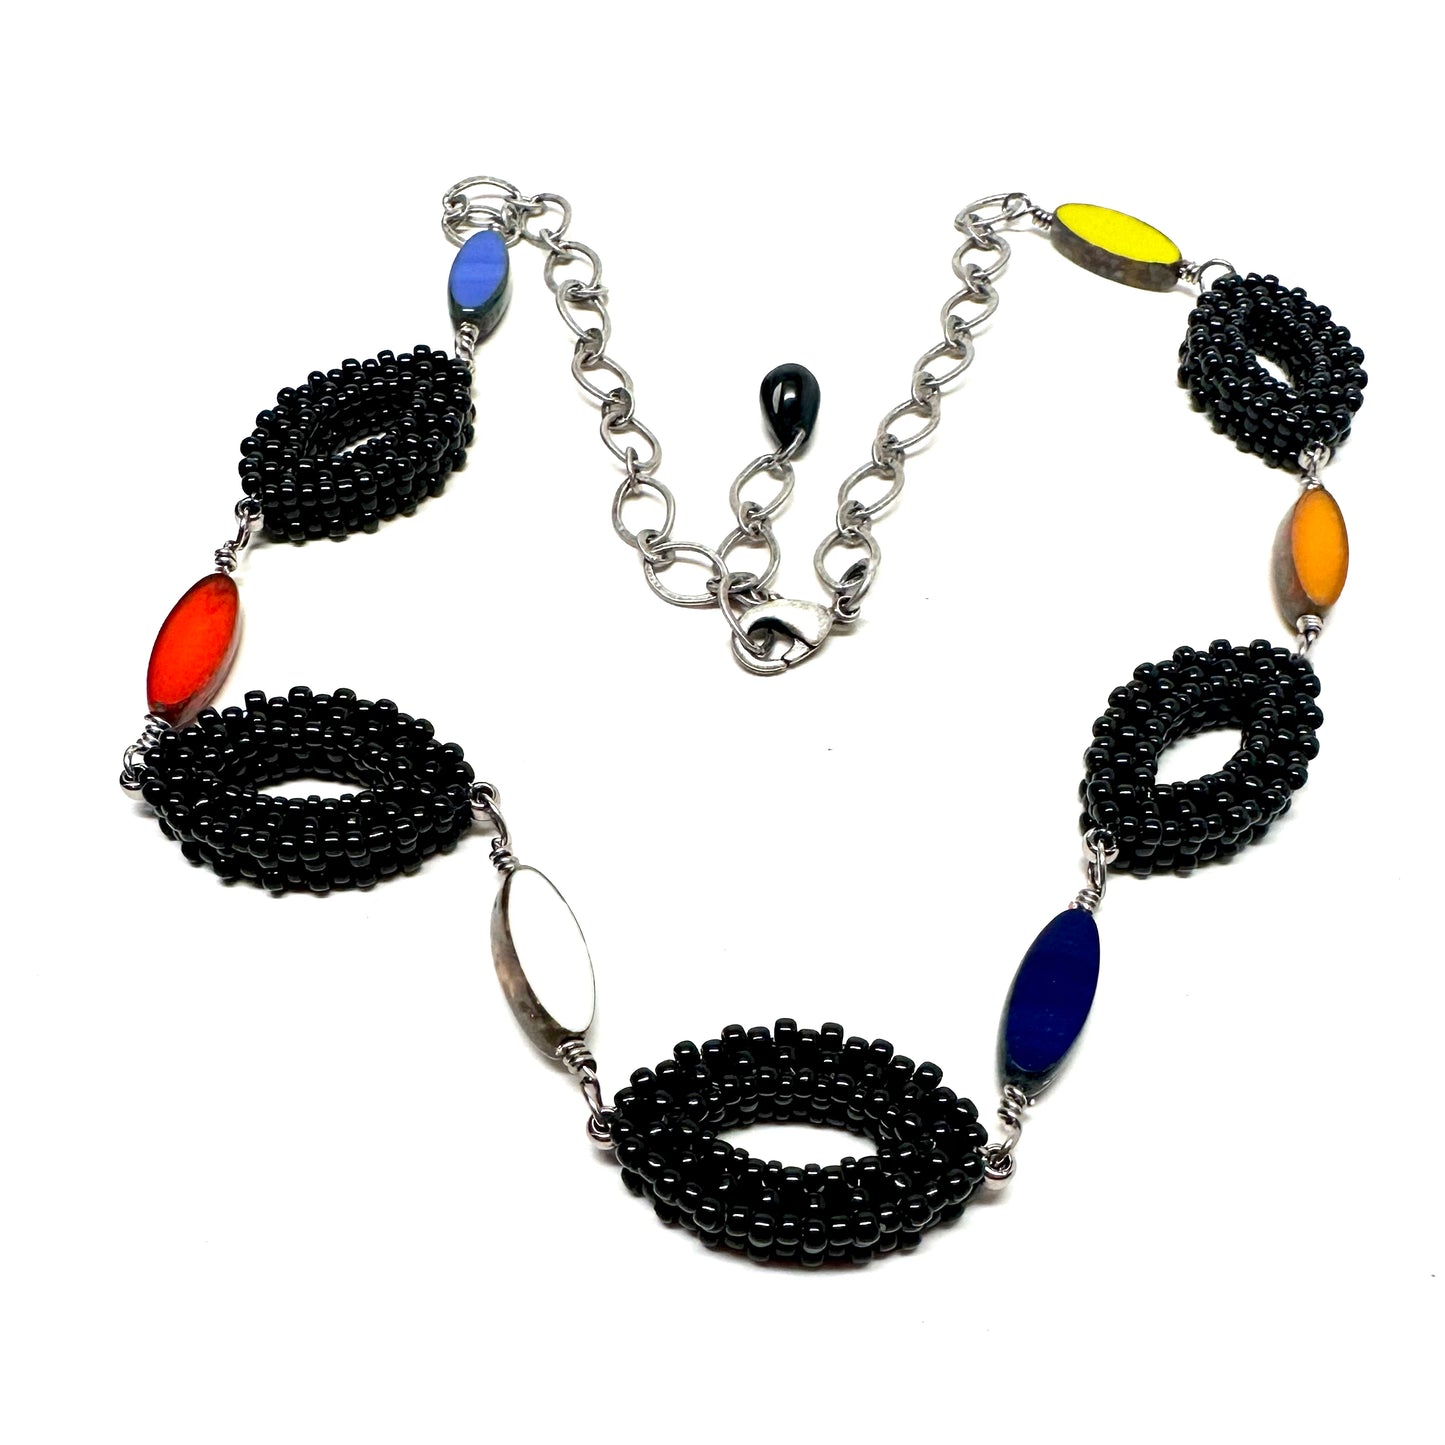 Hojas Link Necklace | Black and Primary Colored Accents